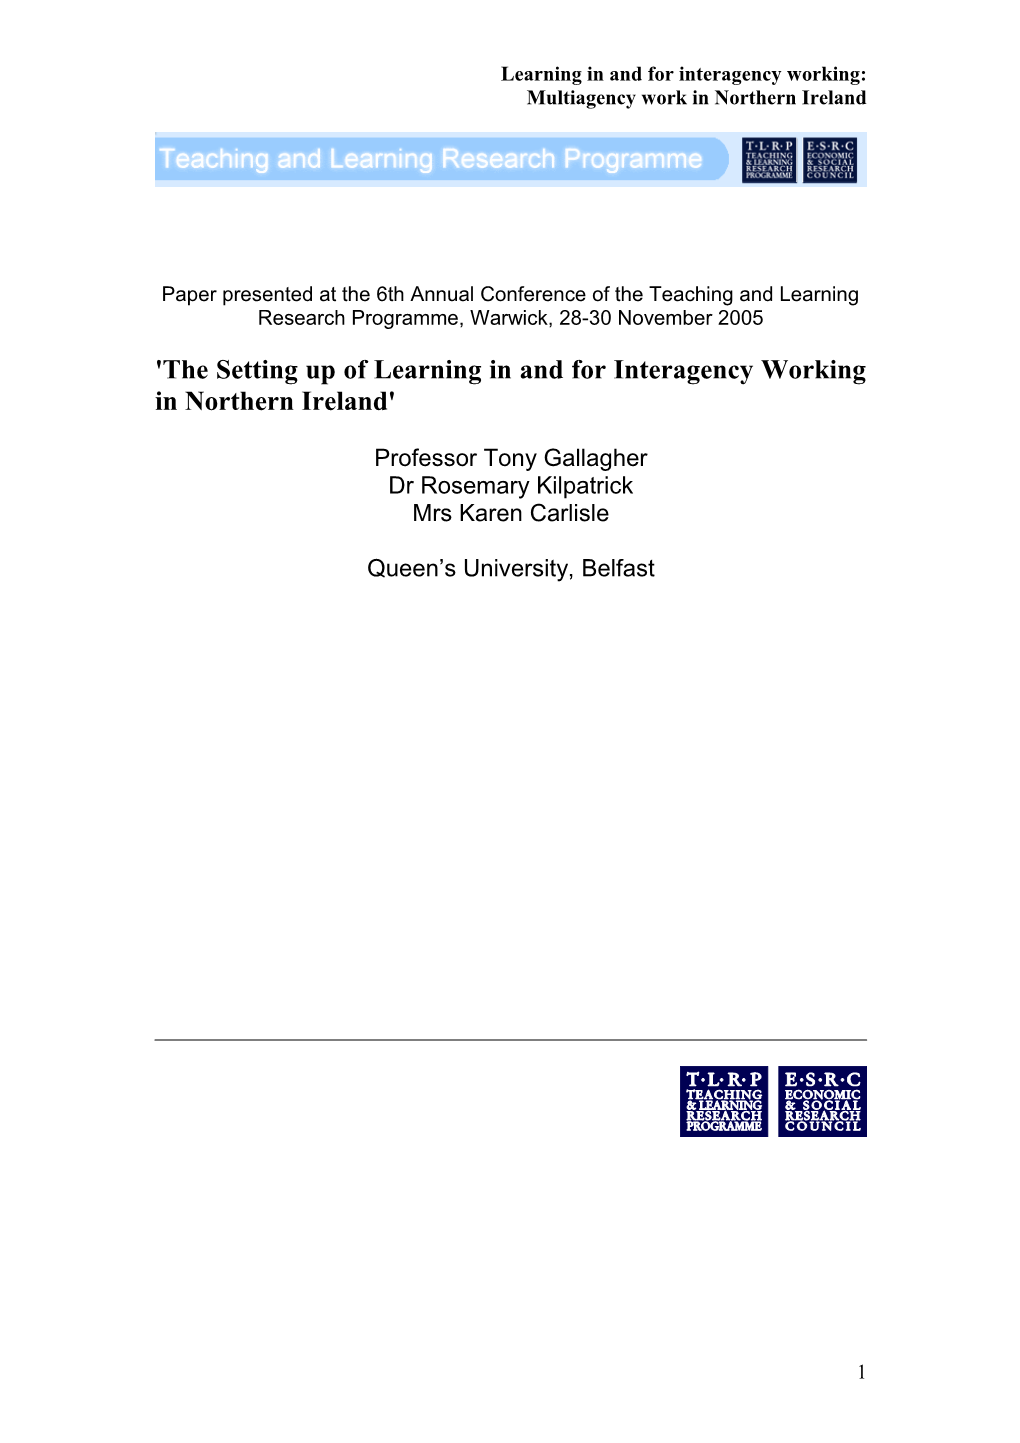 Learning in and for Interagency Working: Multiagency Working in Northern Ireland